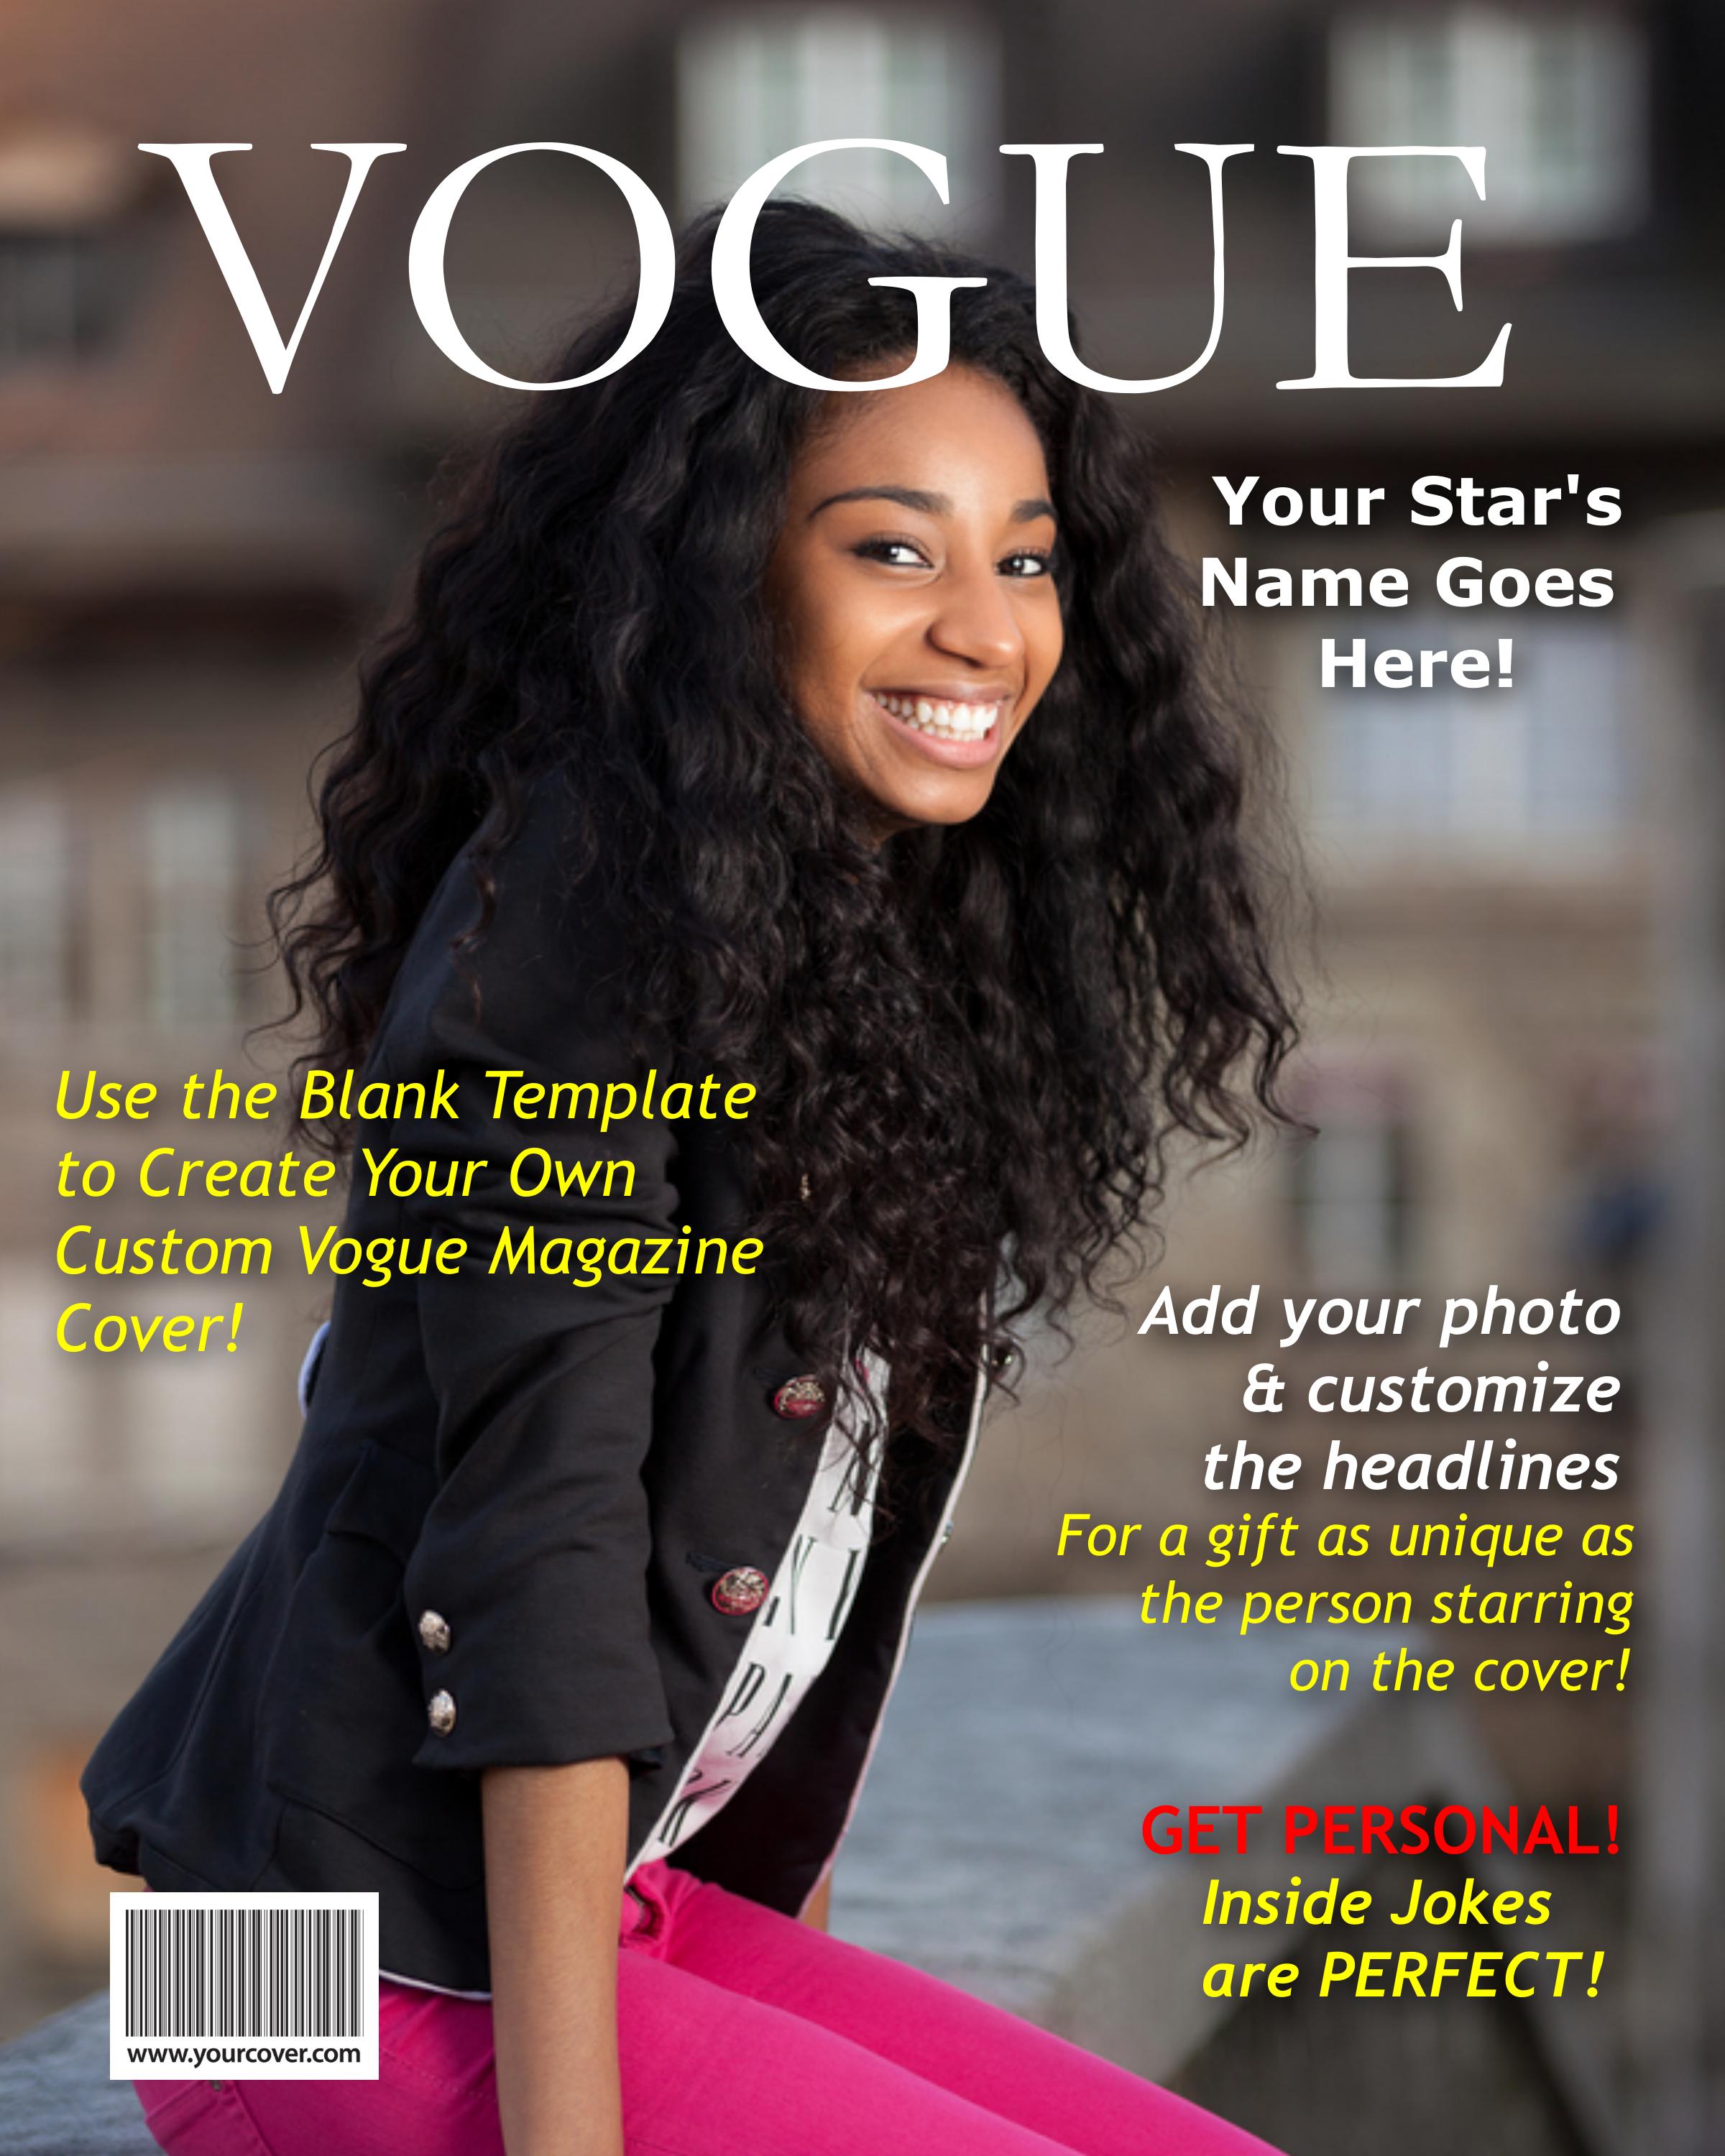 Magazine Cover 20 Examples Format Pdf Examples - vrogue.co